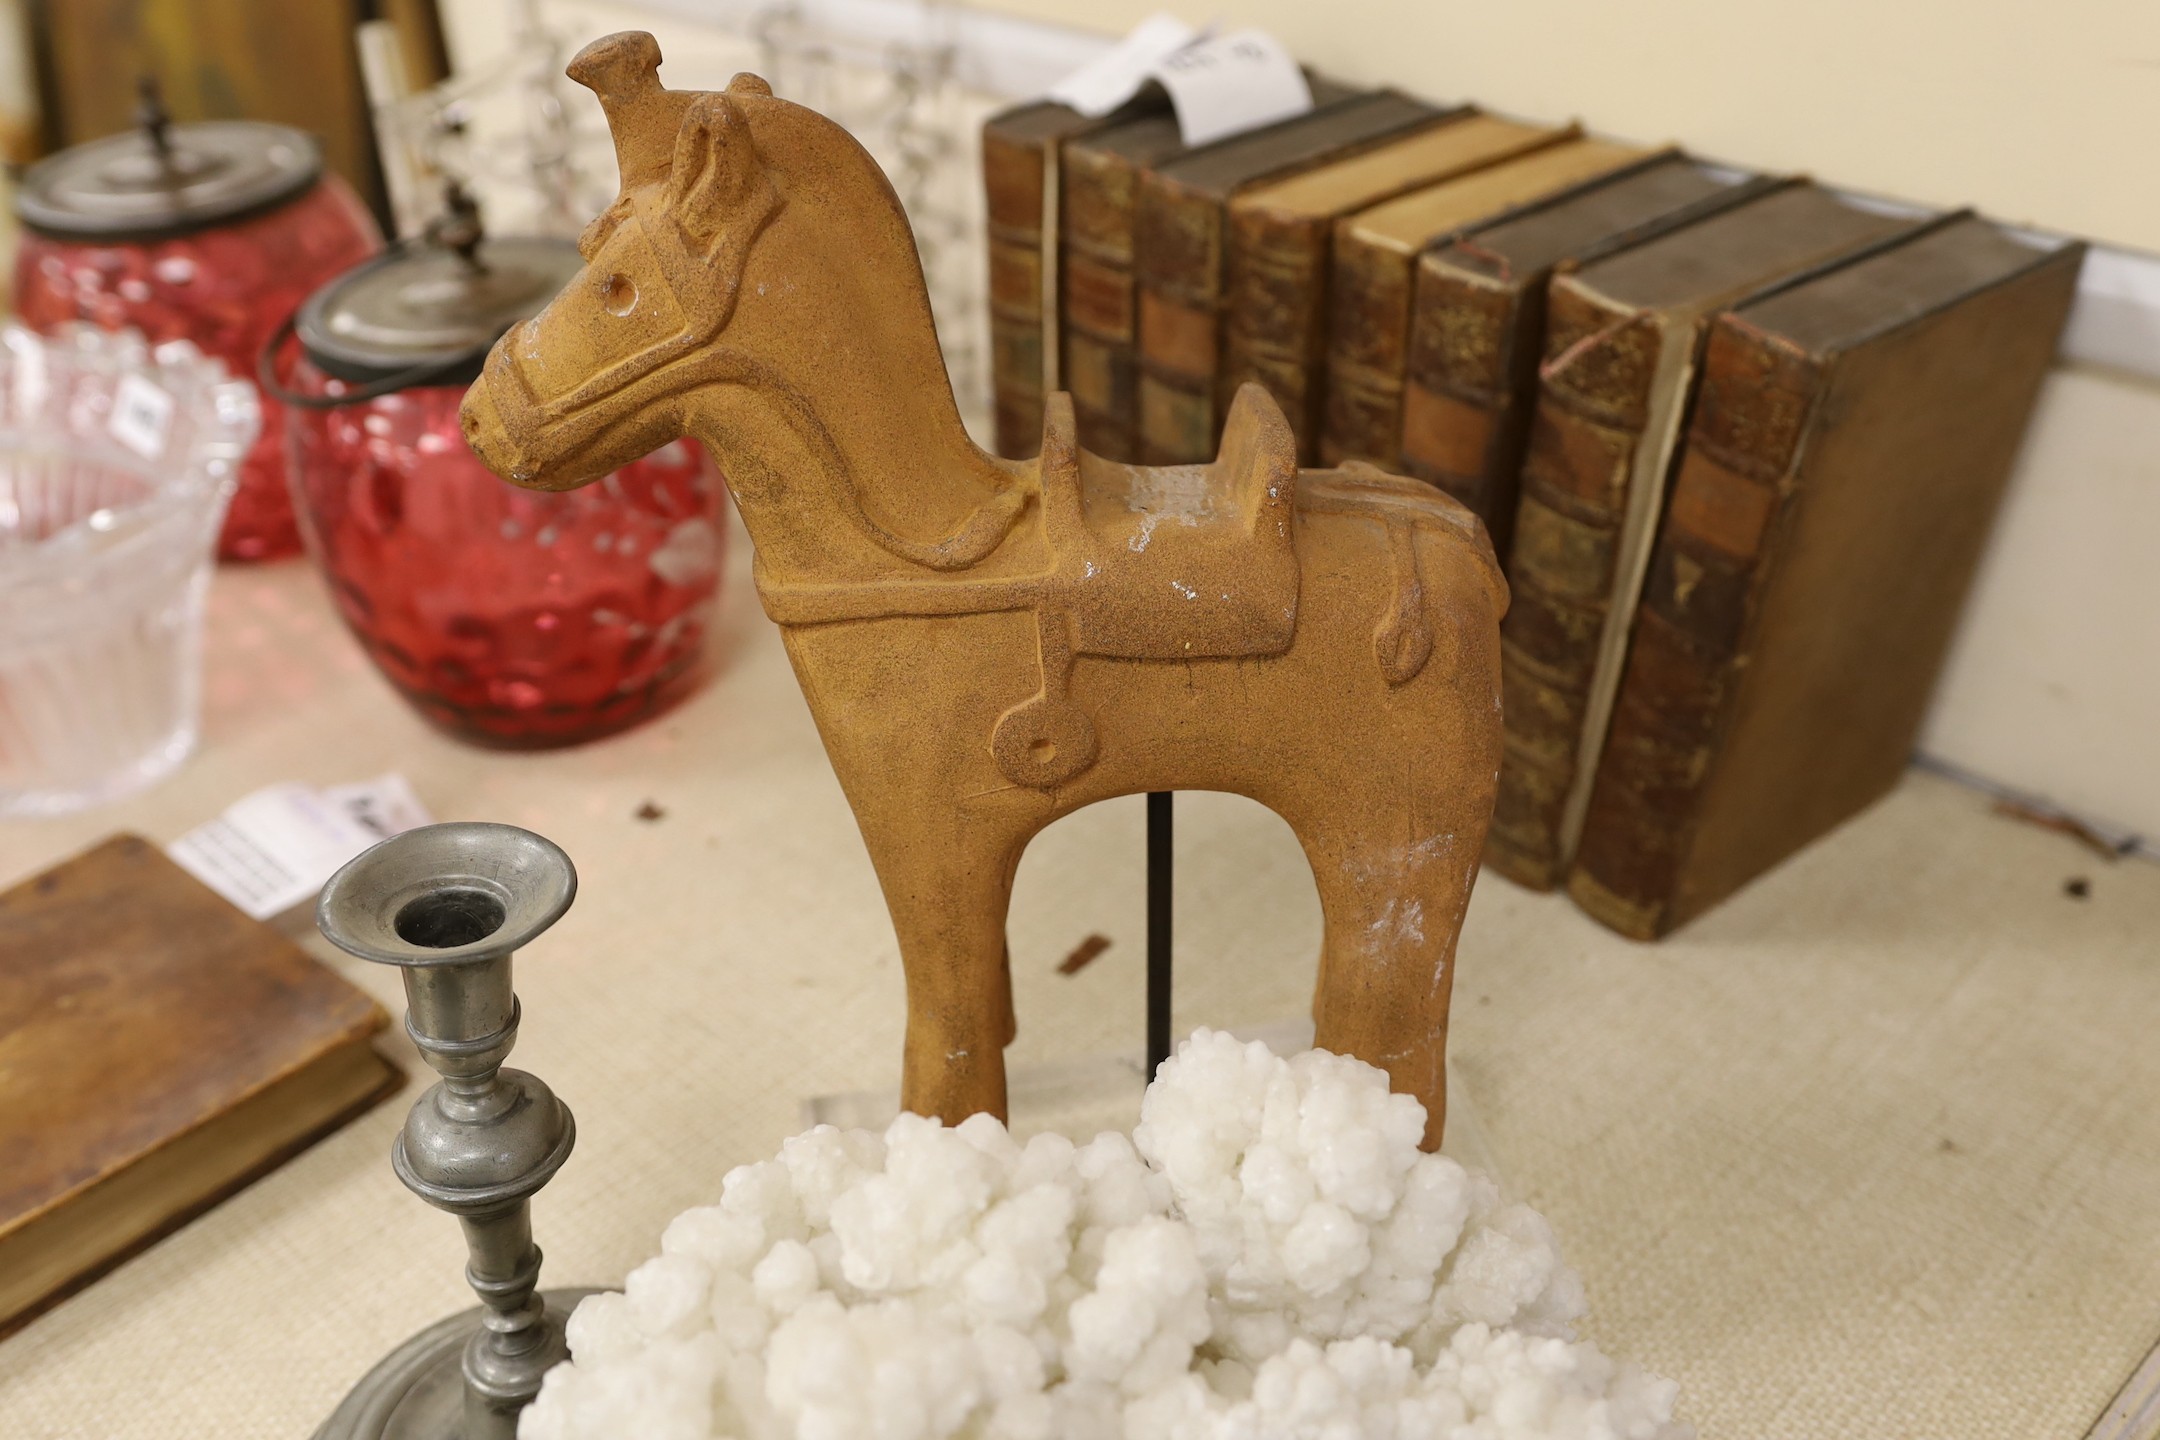 A mounted model of Trojan horse, together with a pewter candlestick, hardwood stands, etc.